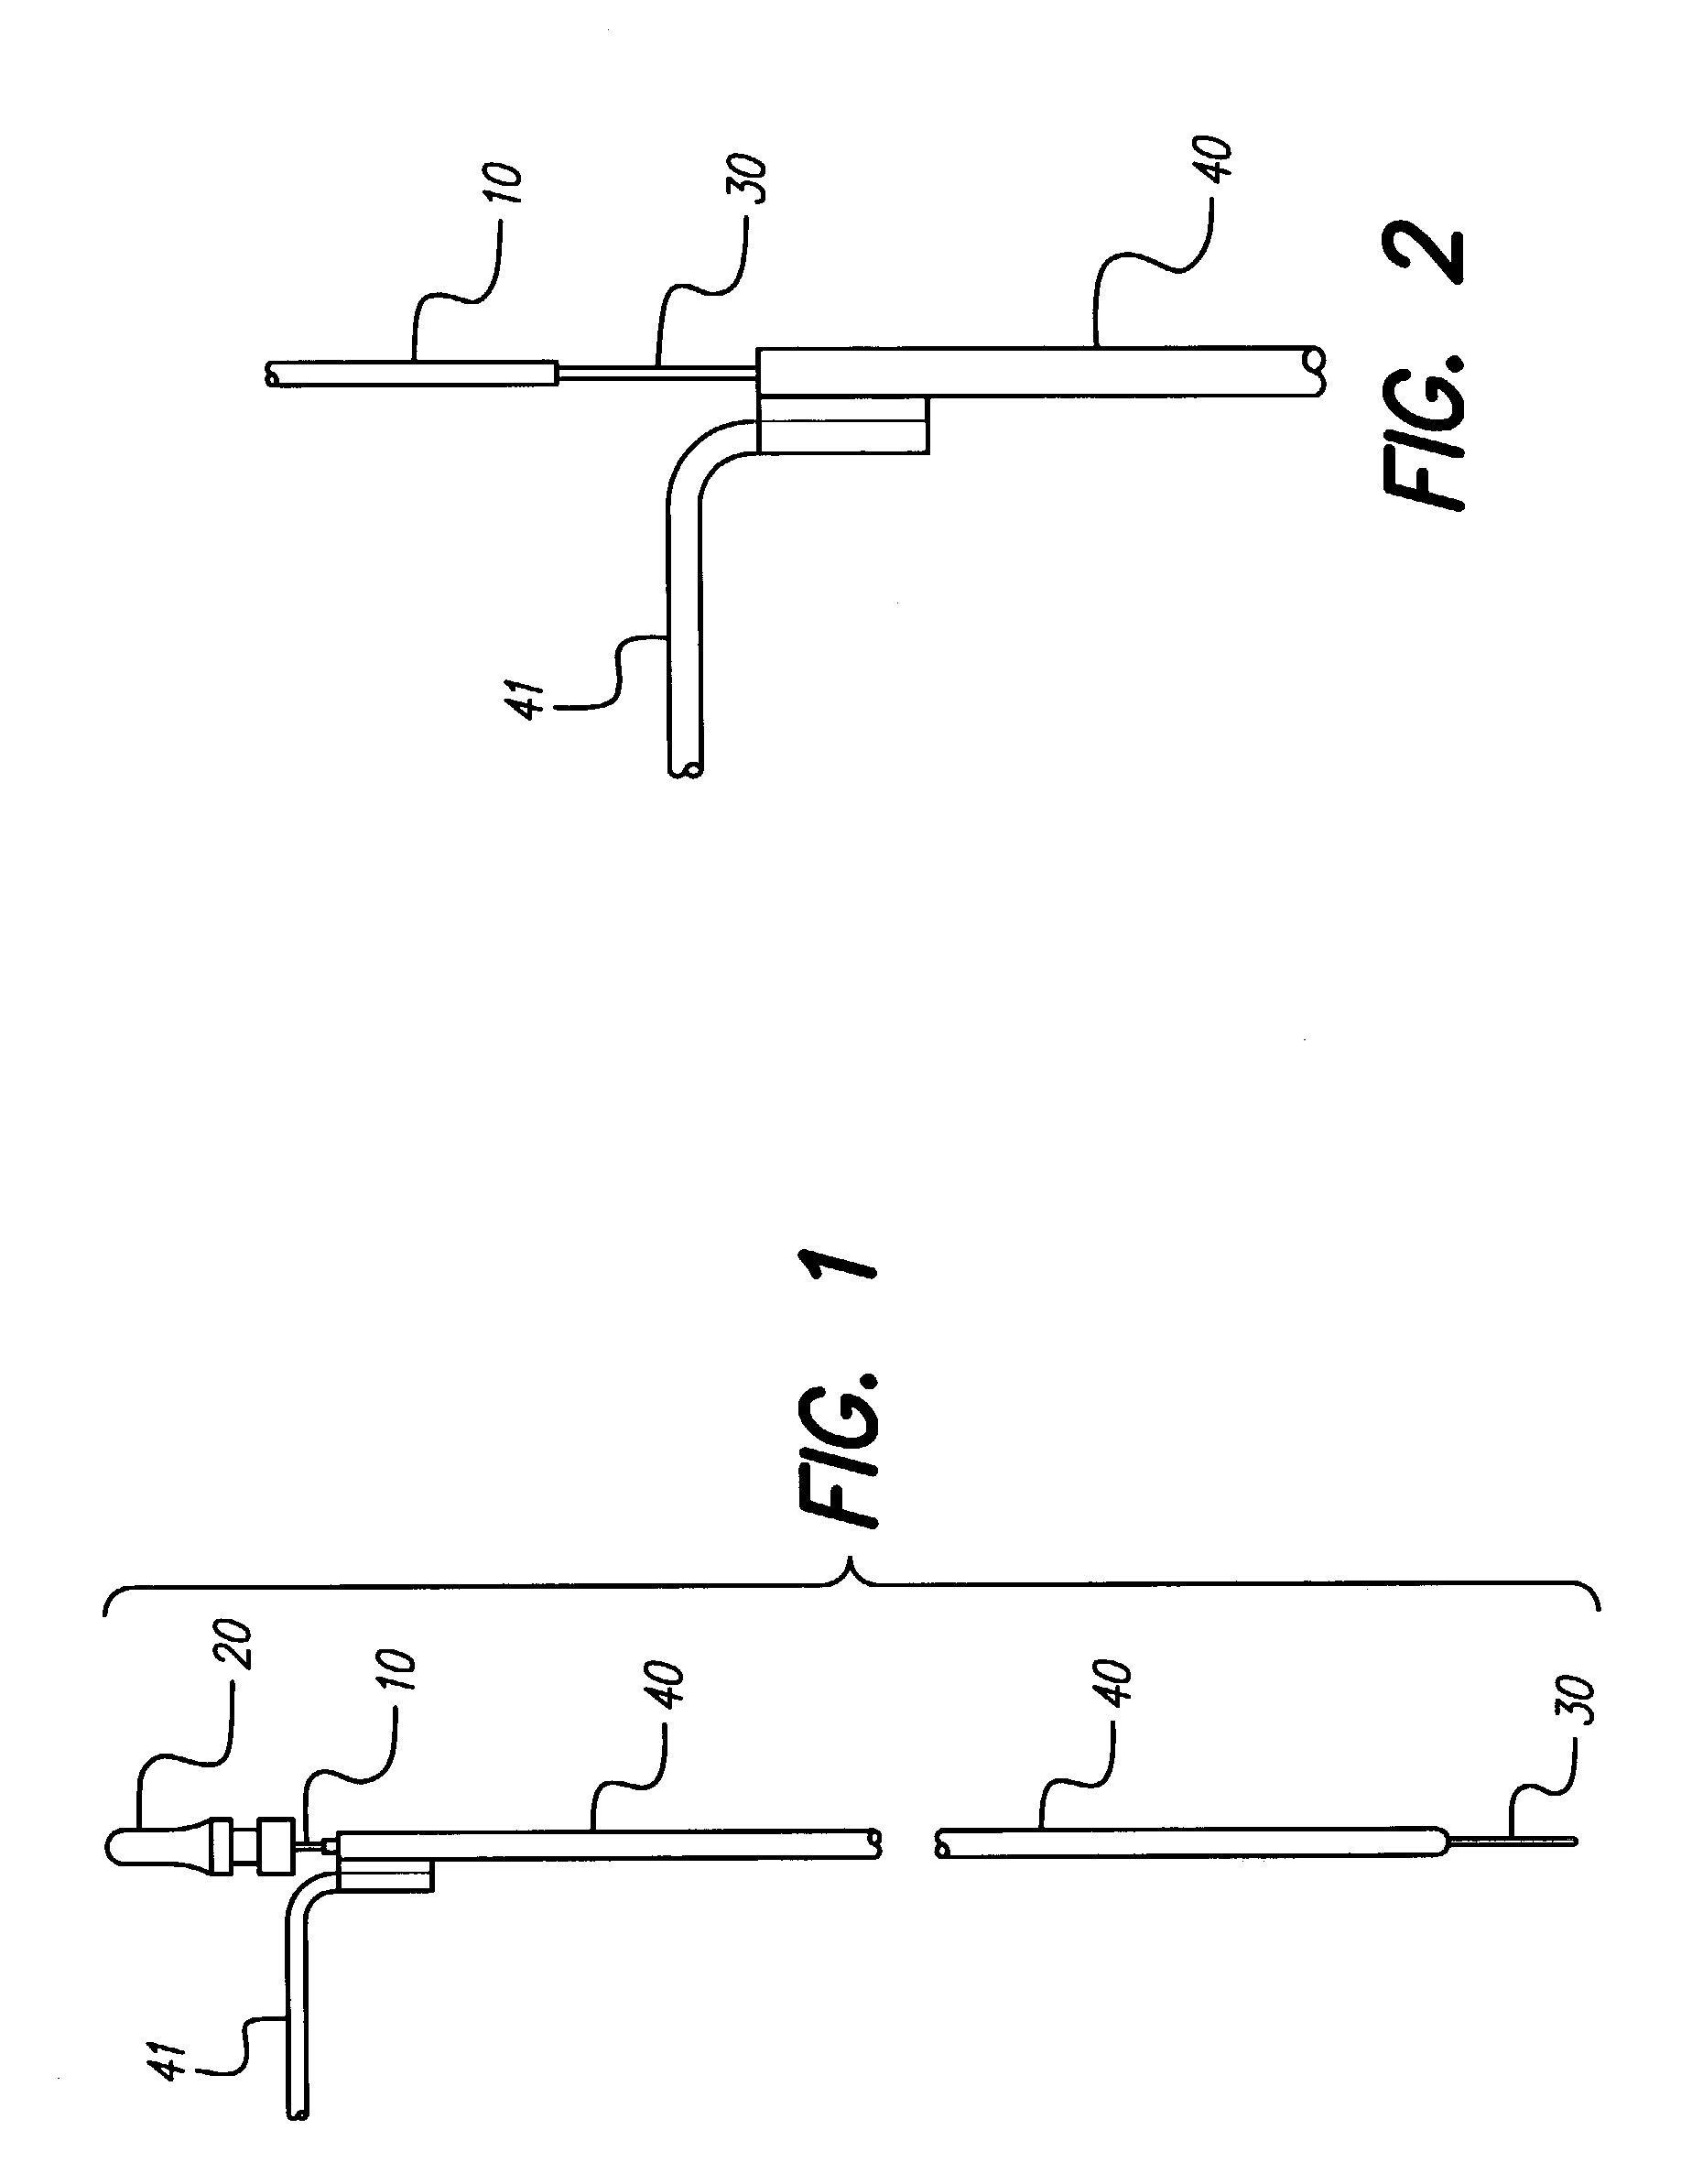 System for permanent electrode placement utilizing microelectrode recording methods